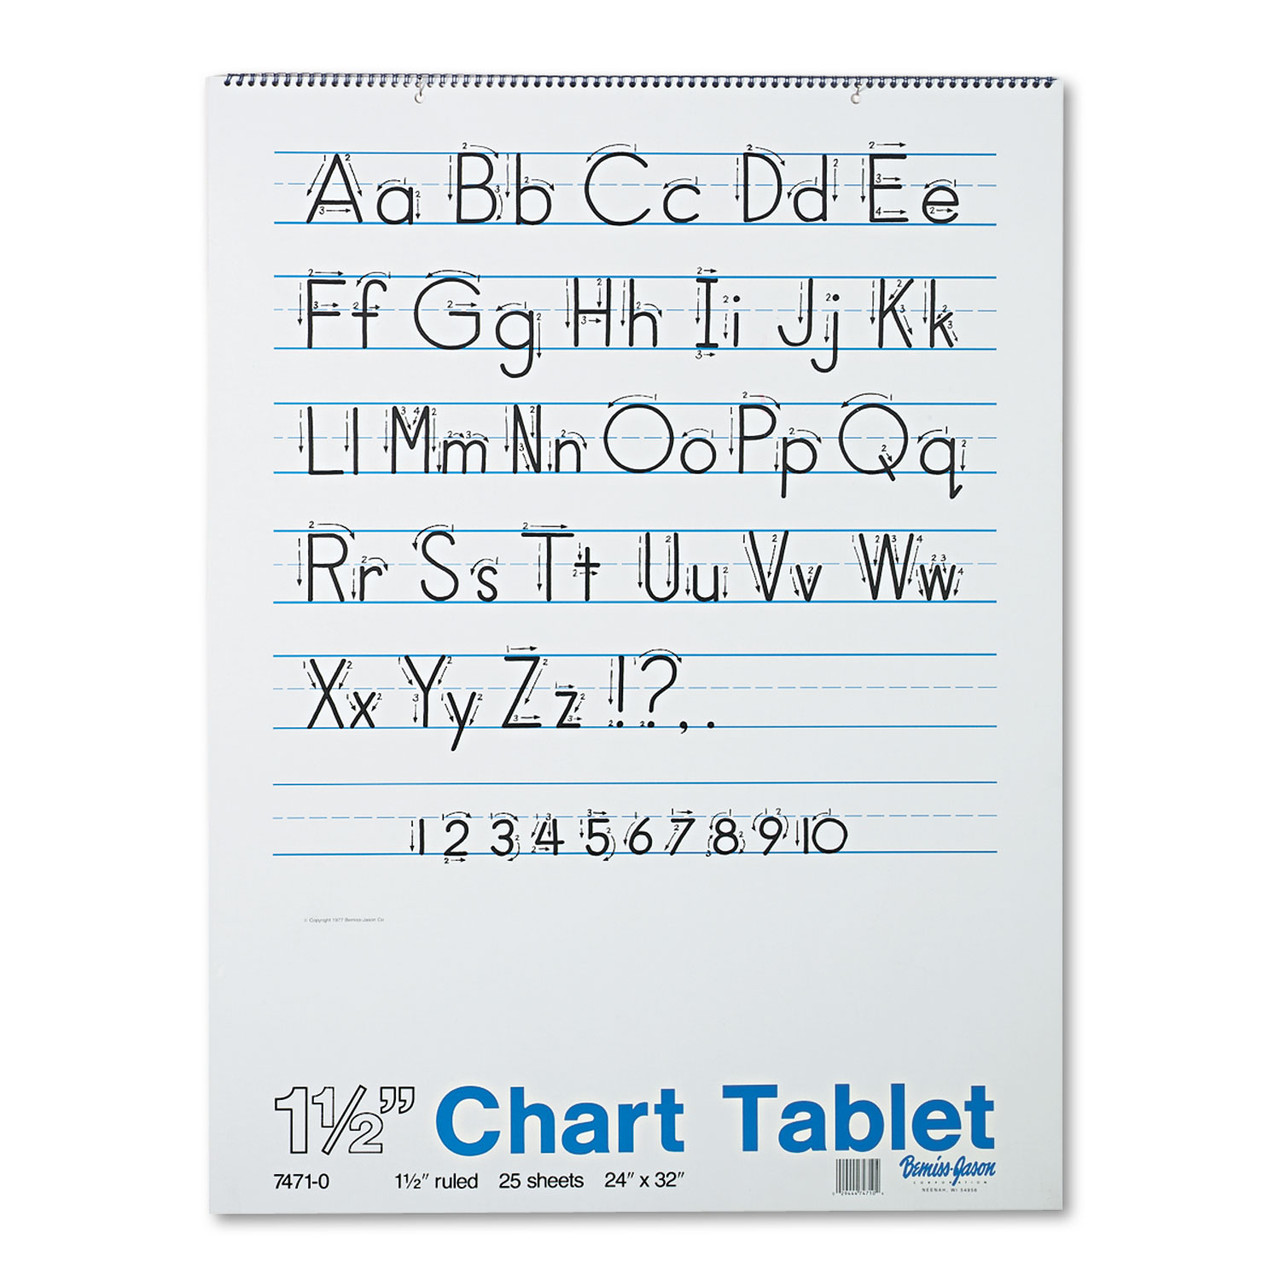 Chart Tablets w/Cursive Cover PAC74620 